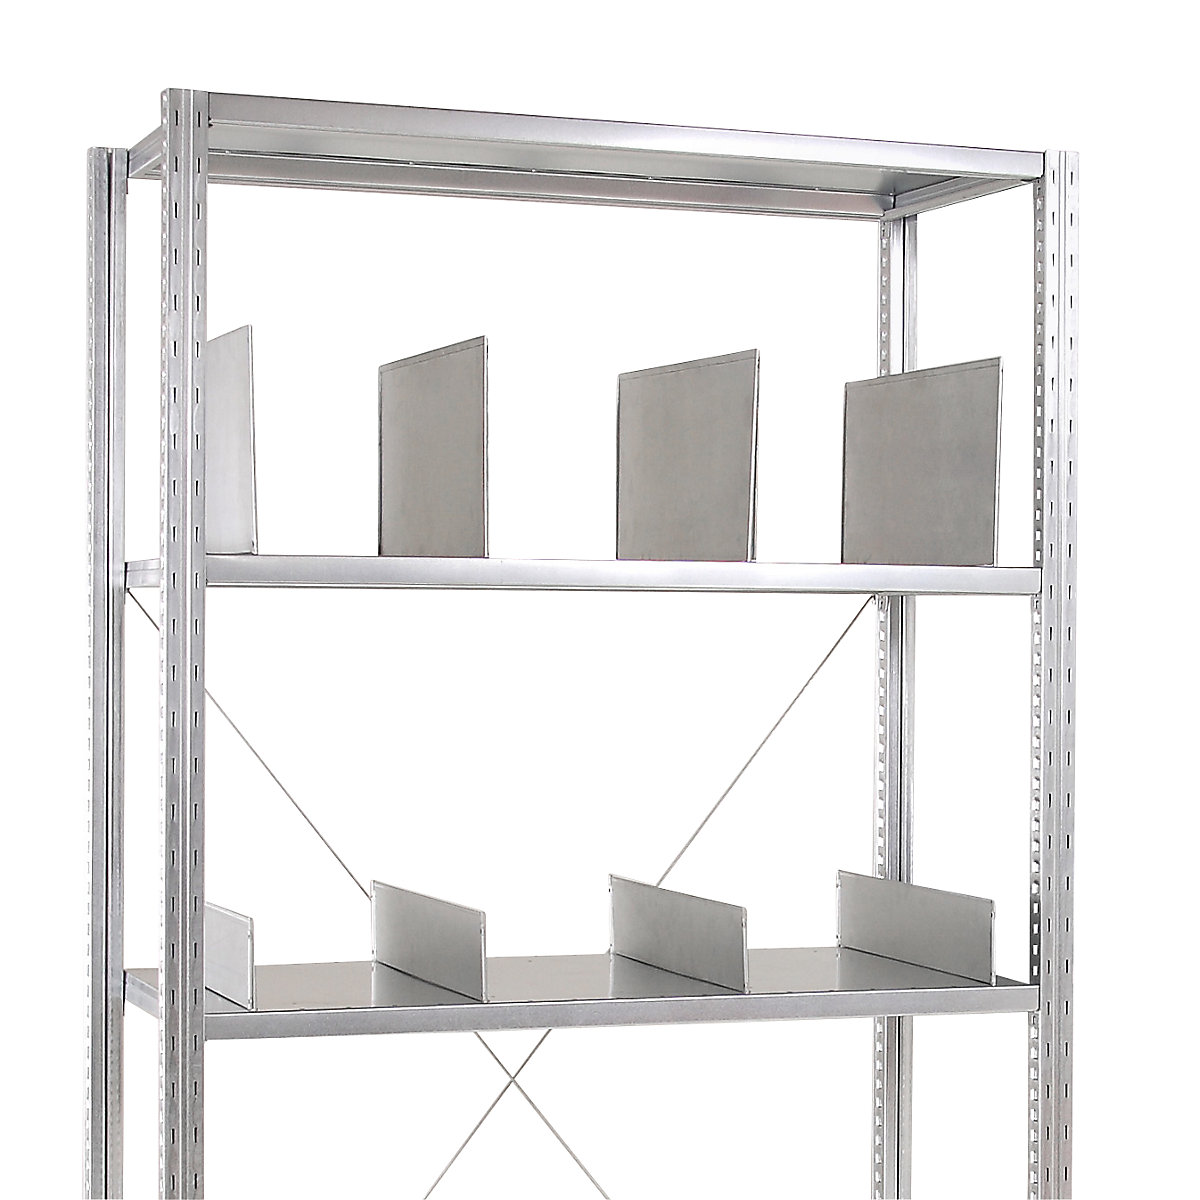 Divider for heavy duty shelf unit, zinc plated